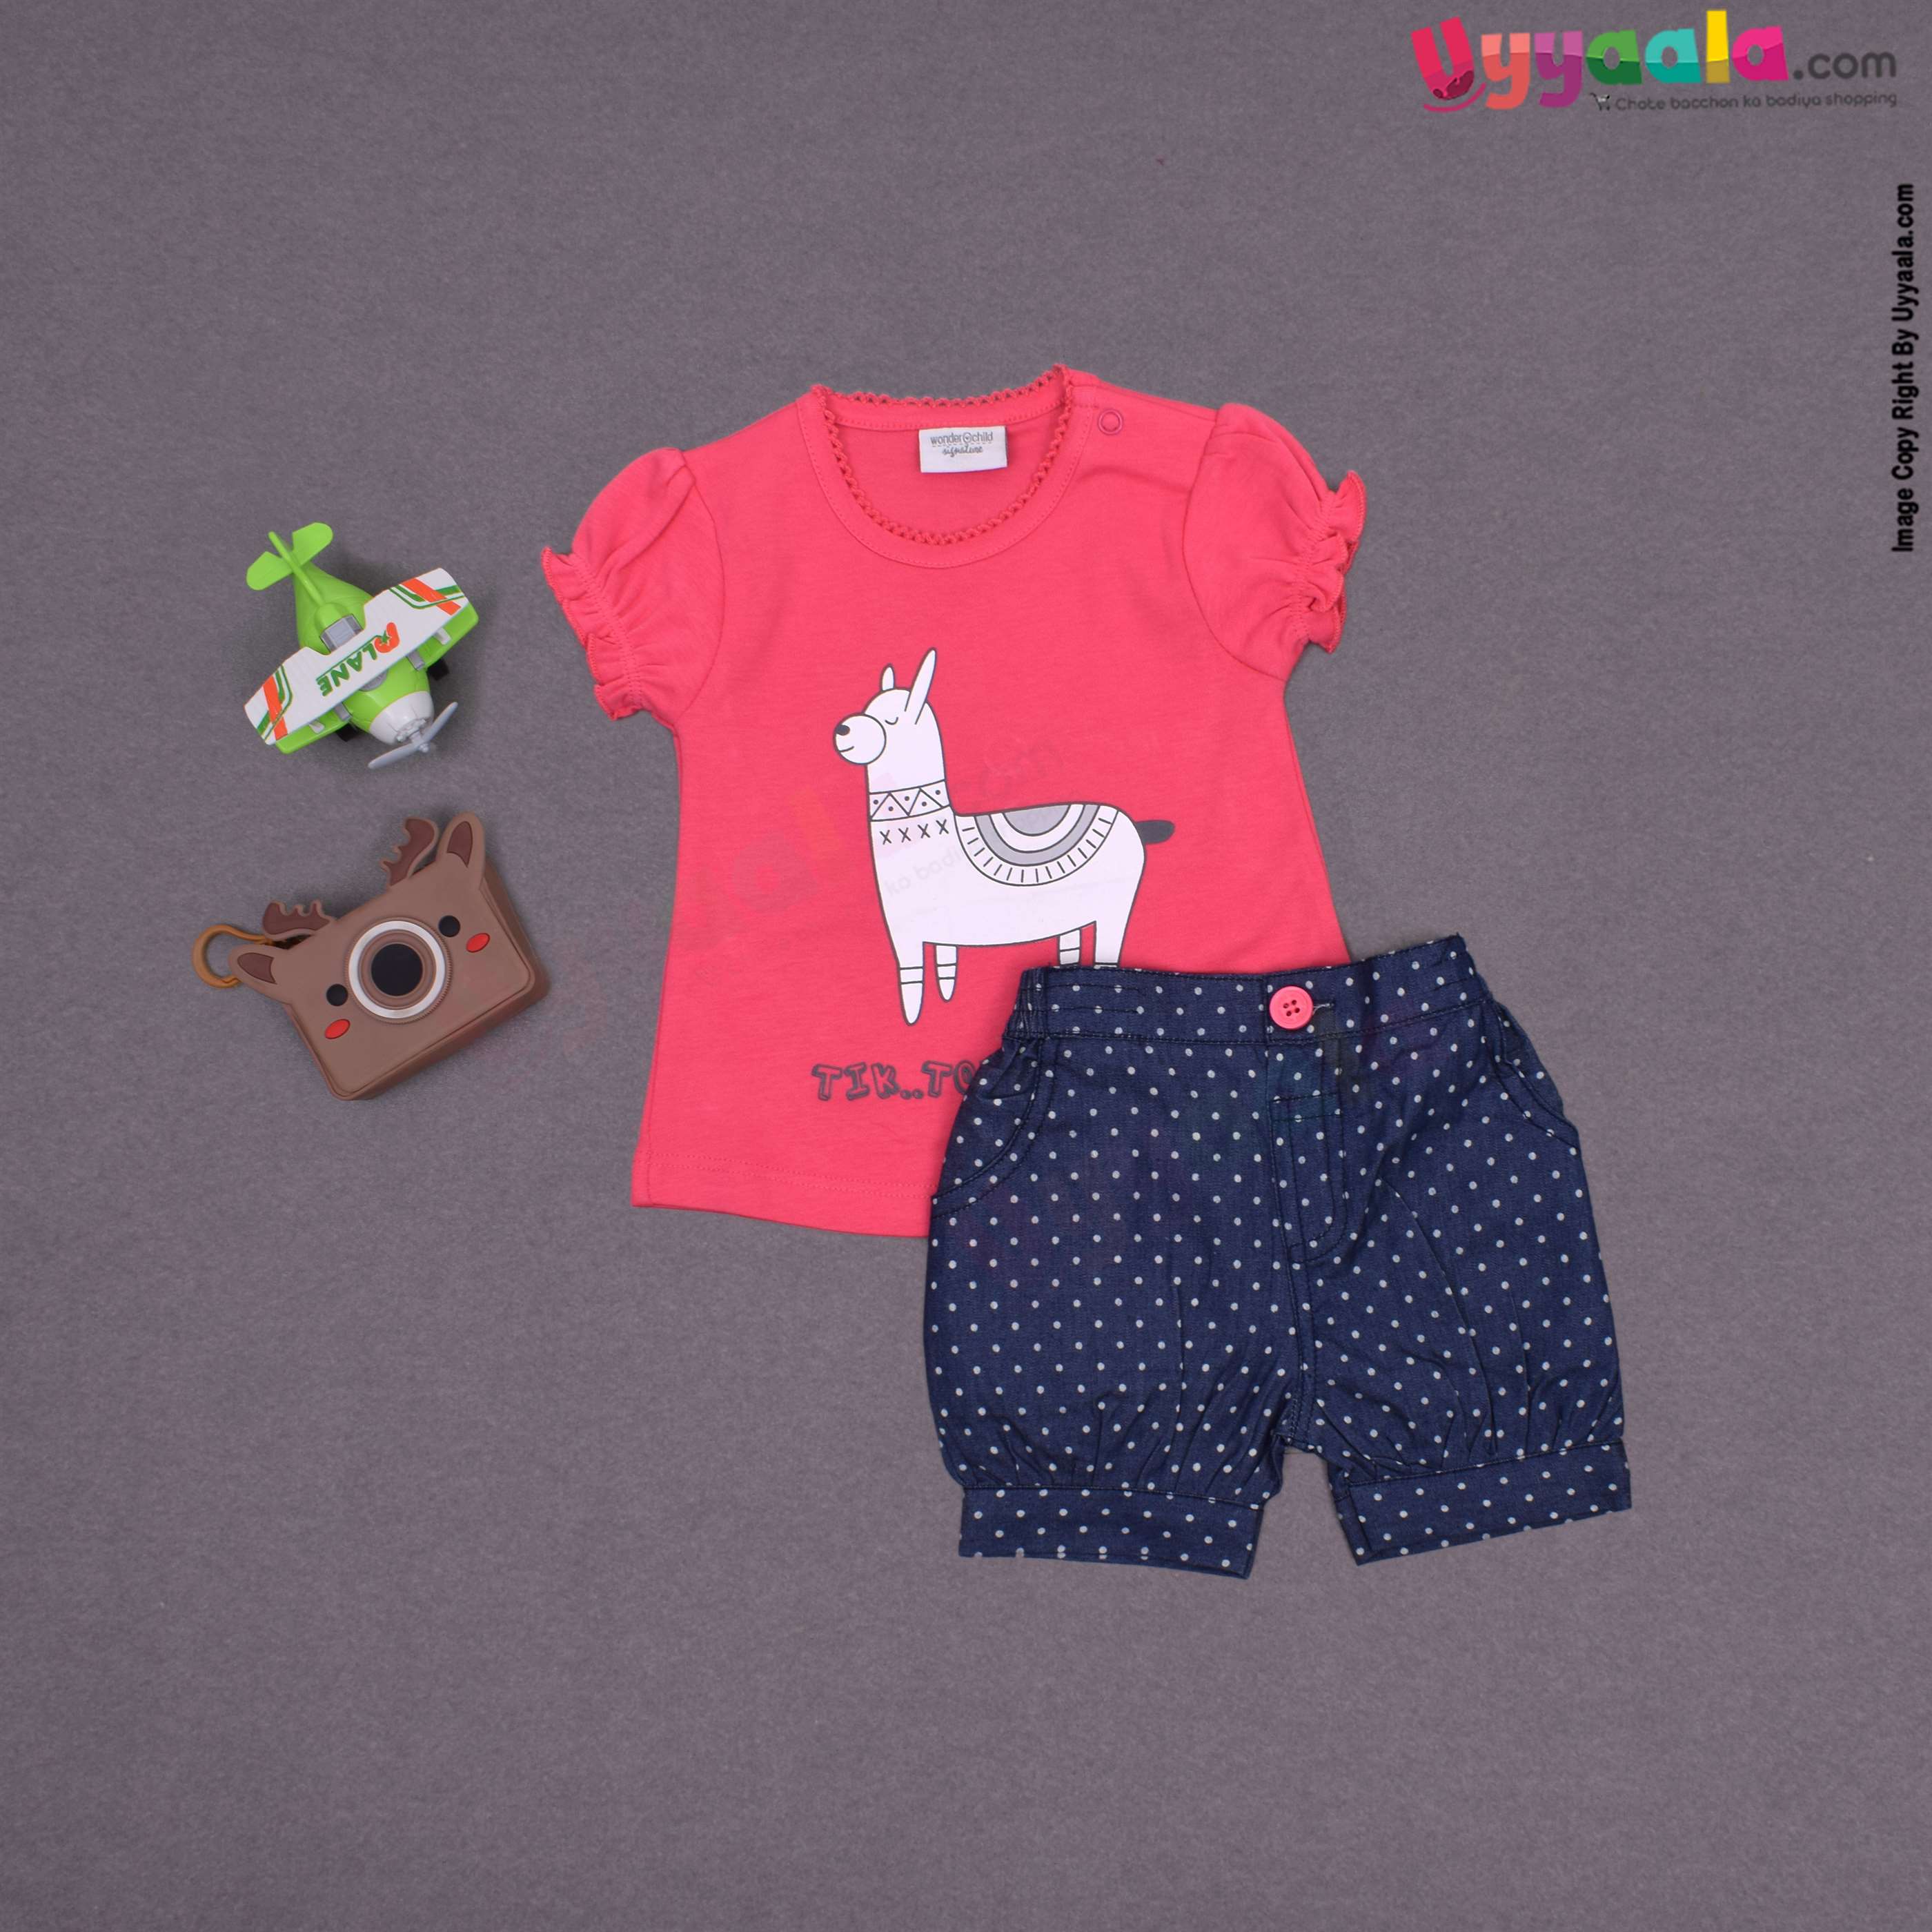 WONDER CHILD Party wear t shirt and short dress set for baby girl with animal and text print- pink & navy blue